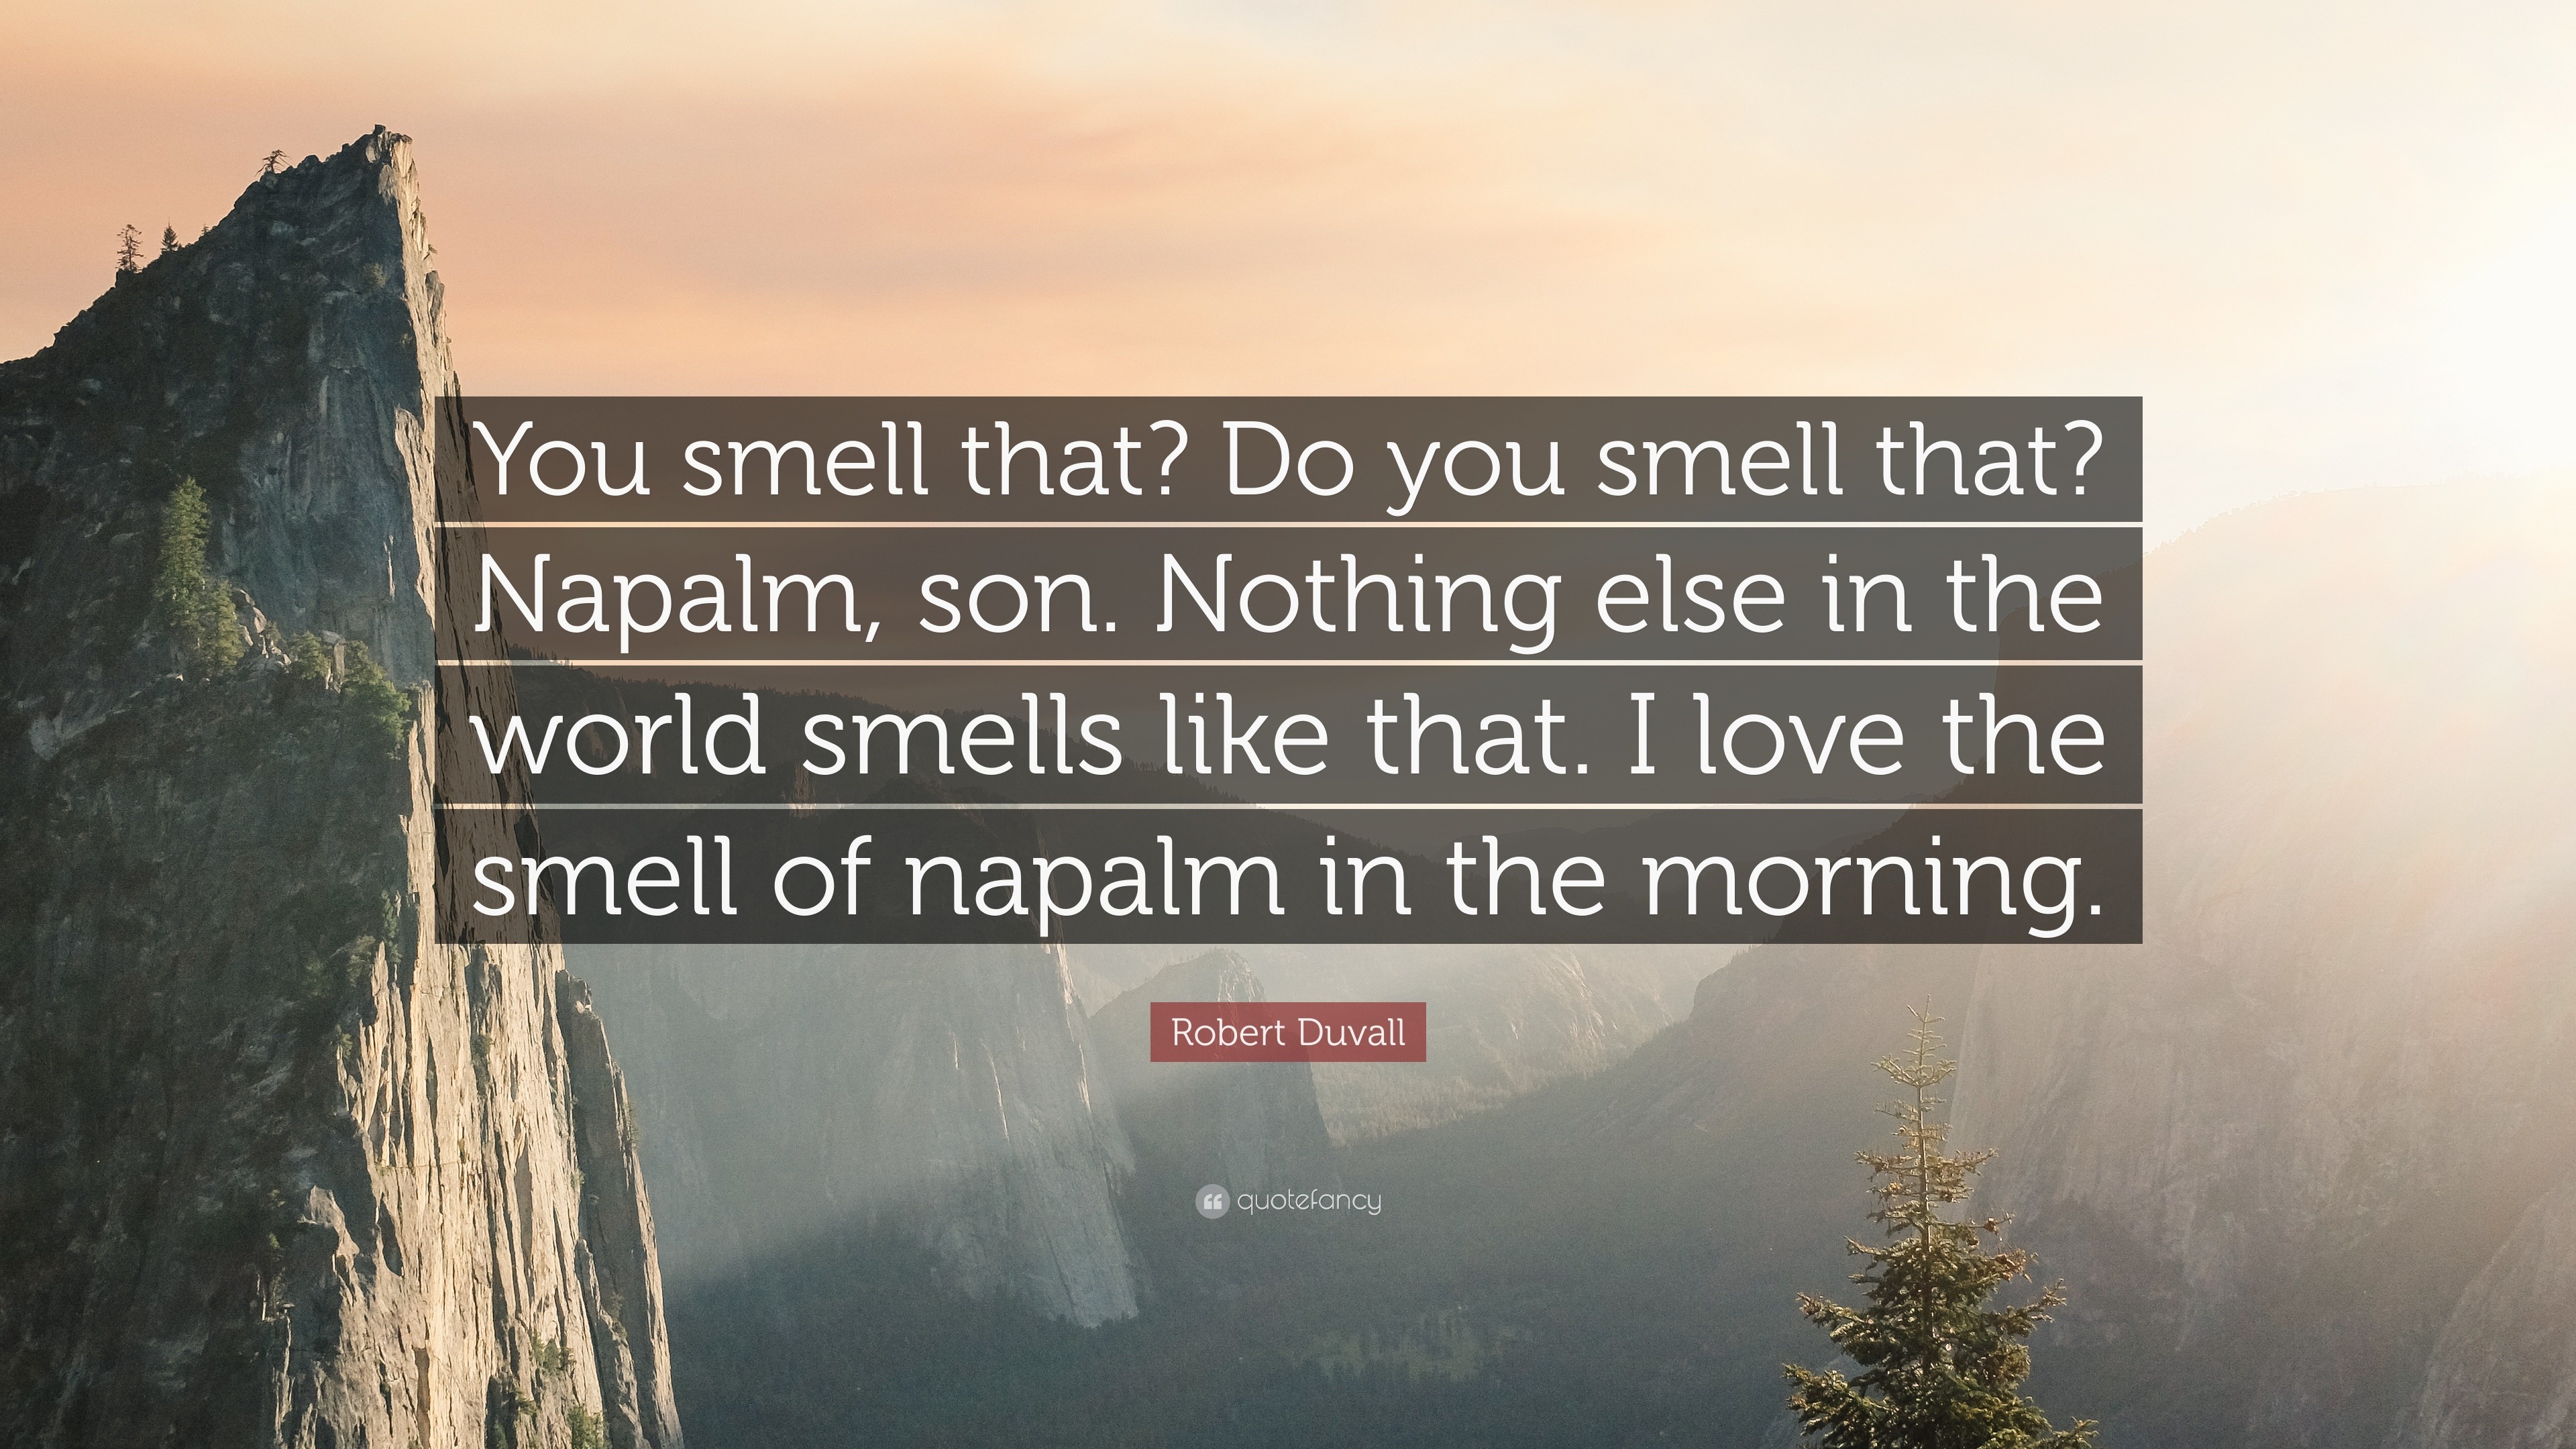 Robert Duvall Quote You Smell That Do You Smell That Napalm Son Nothing Else In The World Smells Like That I Love The Smell Of Napalm I 9 Wallpapers Quotefancy